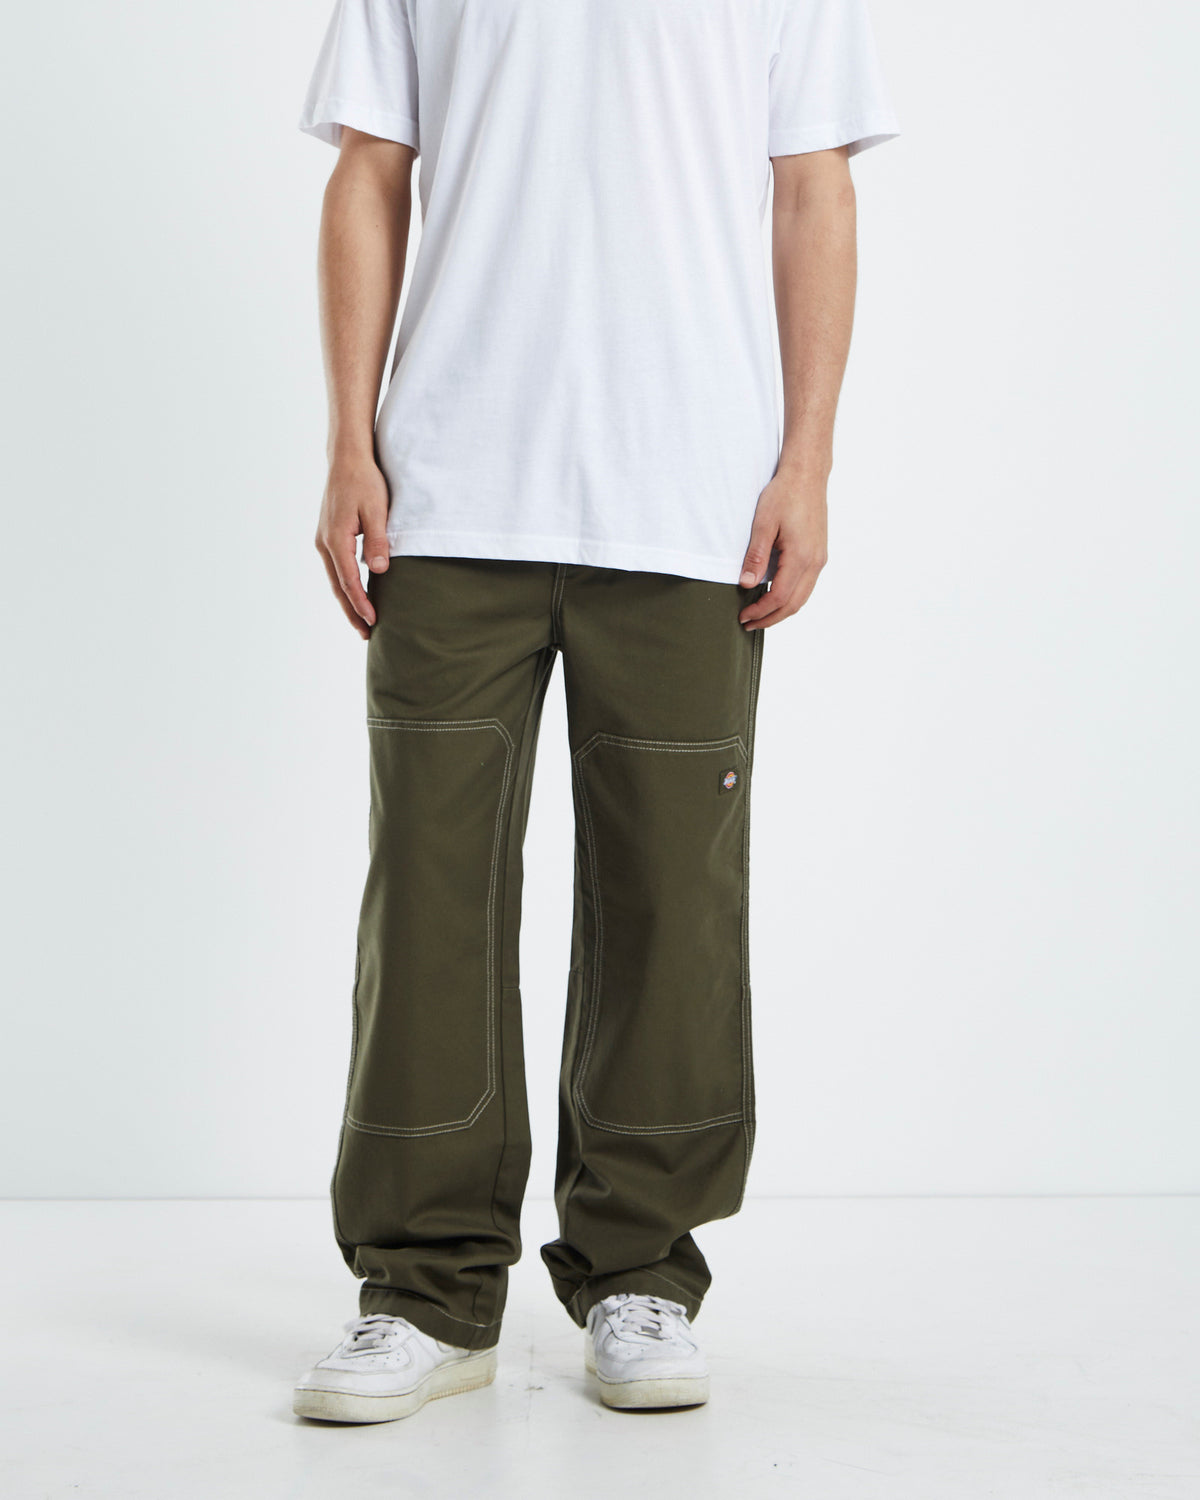 Constrast Cargo Pant - Military Green/Sand Stitch